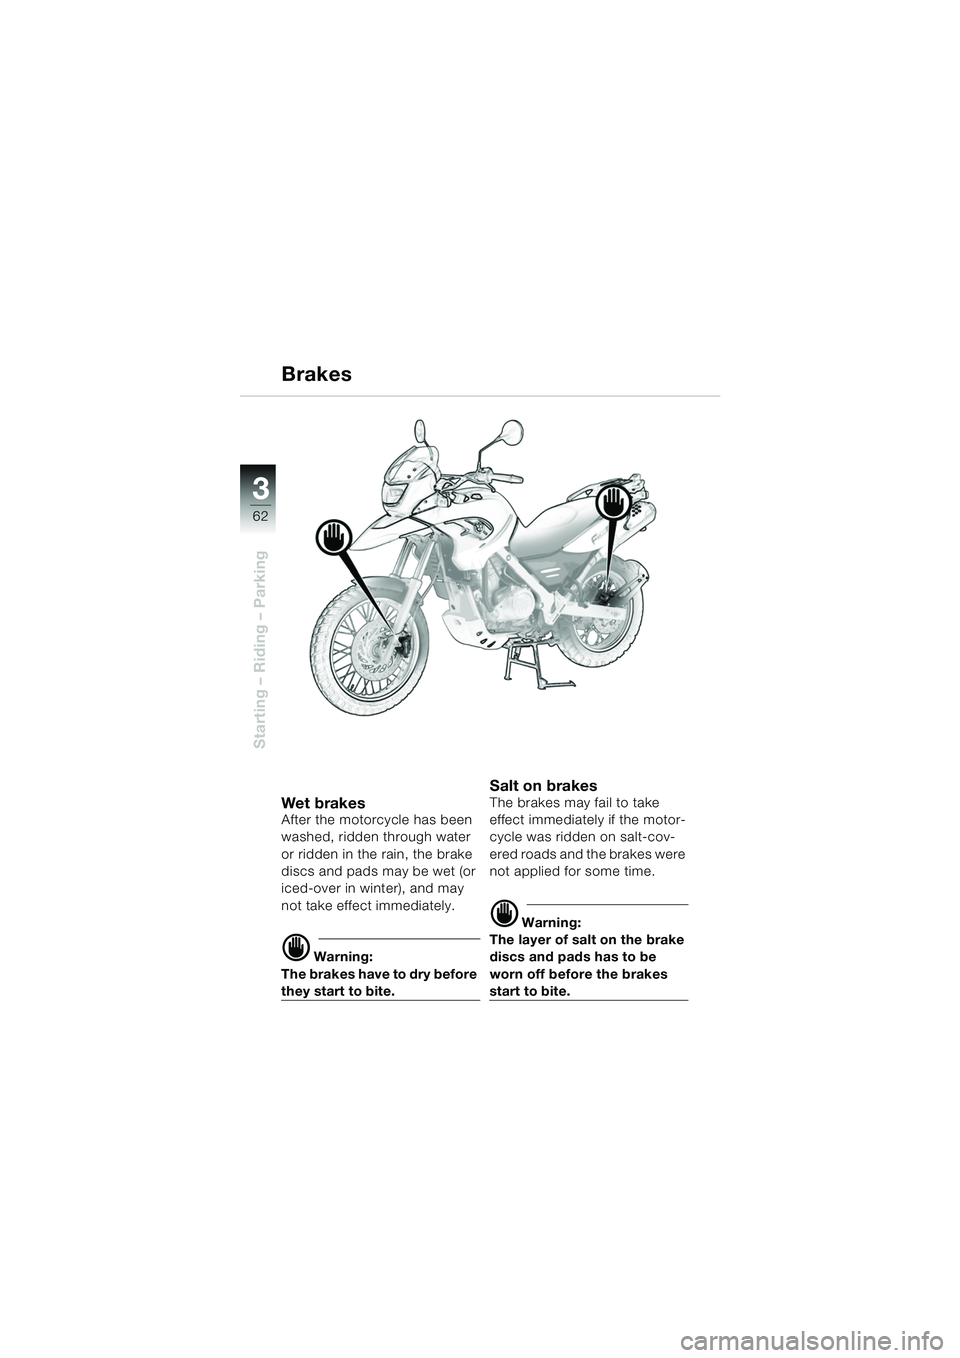 BMW MOTORRAD F 650 GS DAKAR 2003  Riders Manual (in English) 3
62
Starting – Riding – Parking
Brakes
Wet bra kesAfter the motorcycle has been 
washed, ridden through water 
or ridden in the rain, the brake 
discs and pads may be wet (or 
iced-over in winter